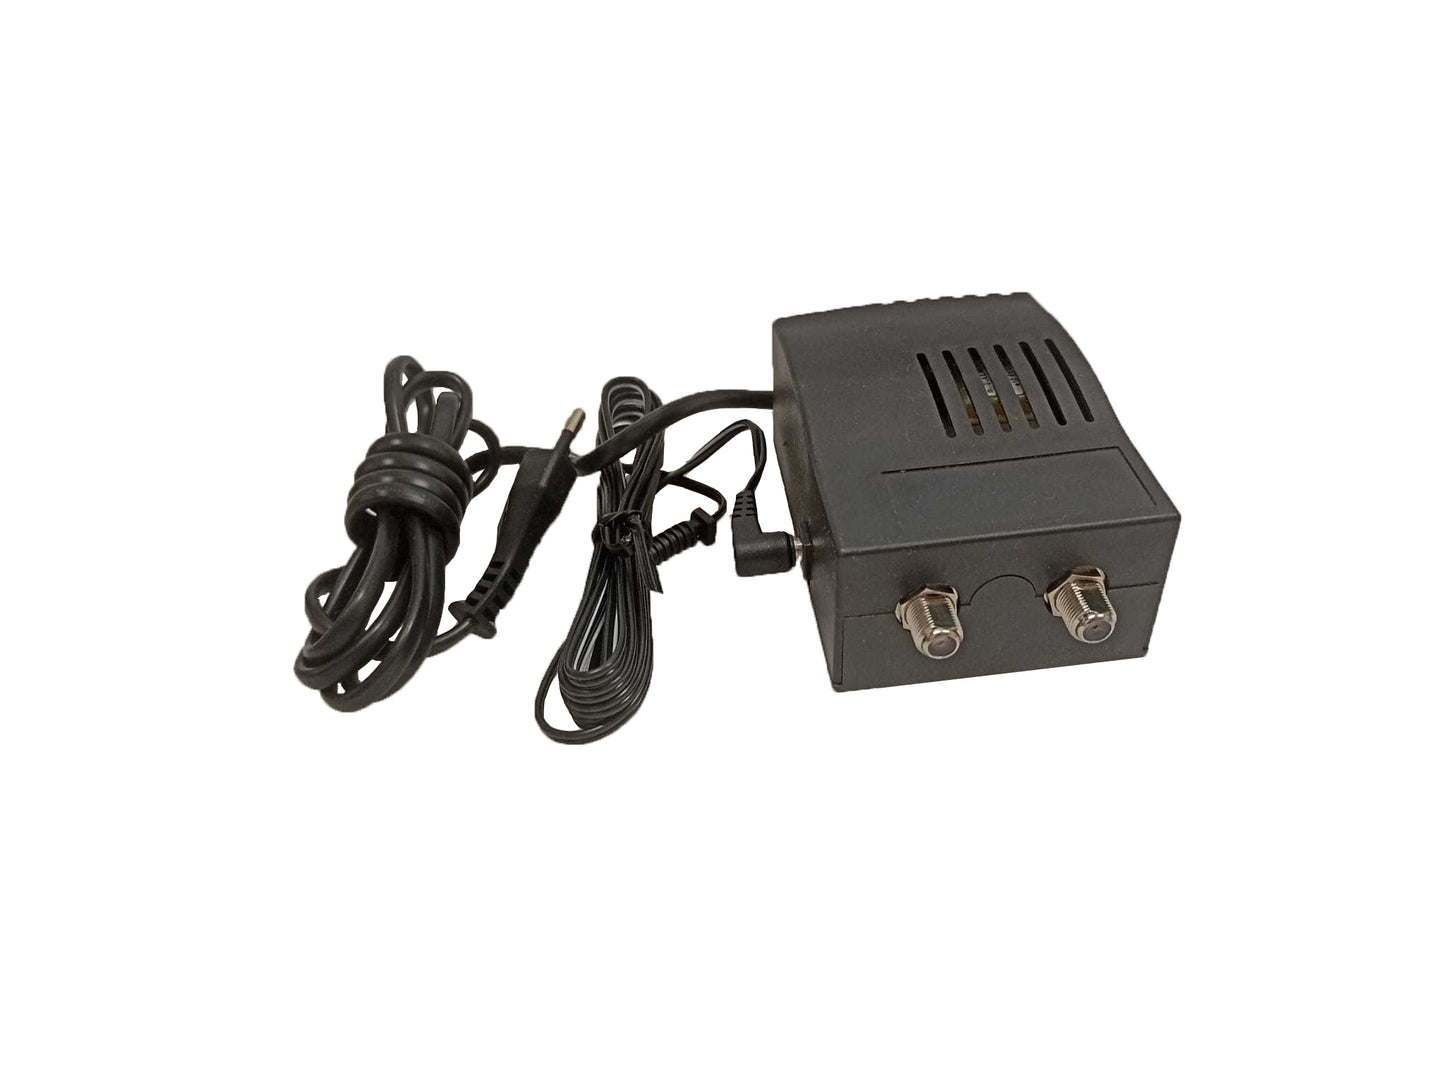 Offel Power supply for Discos/D 220V and DC antenna, stabilized power supply